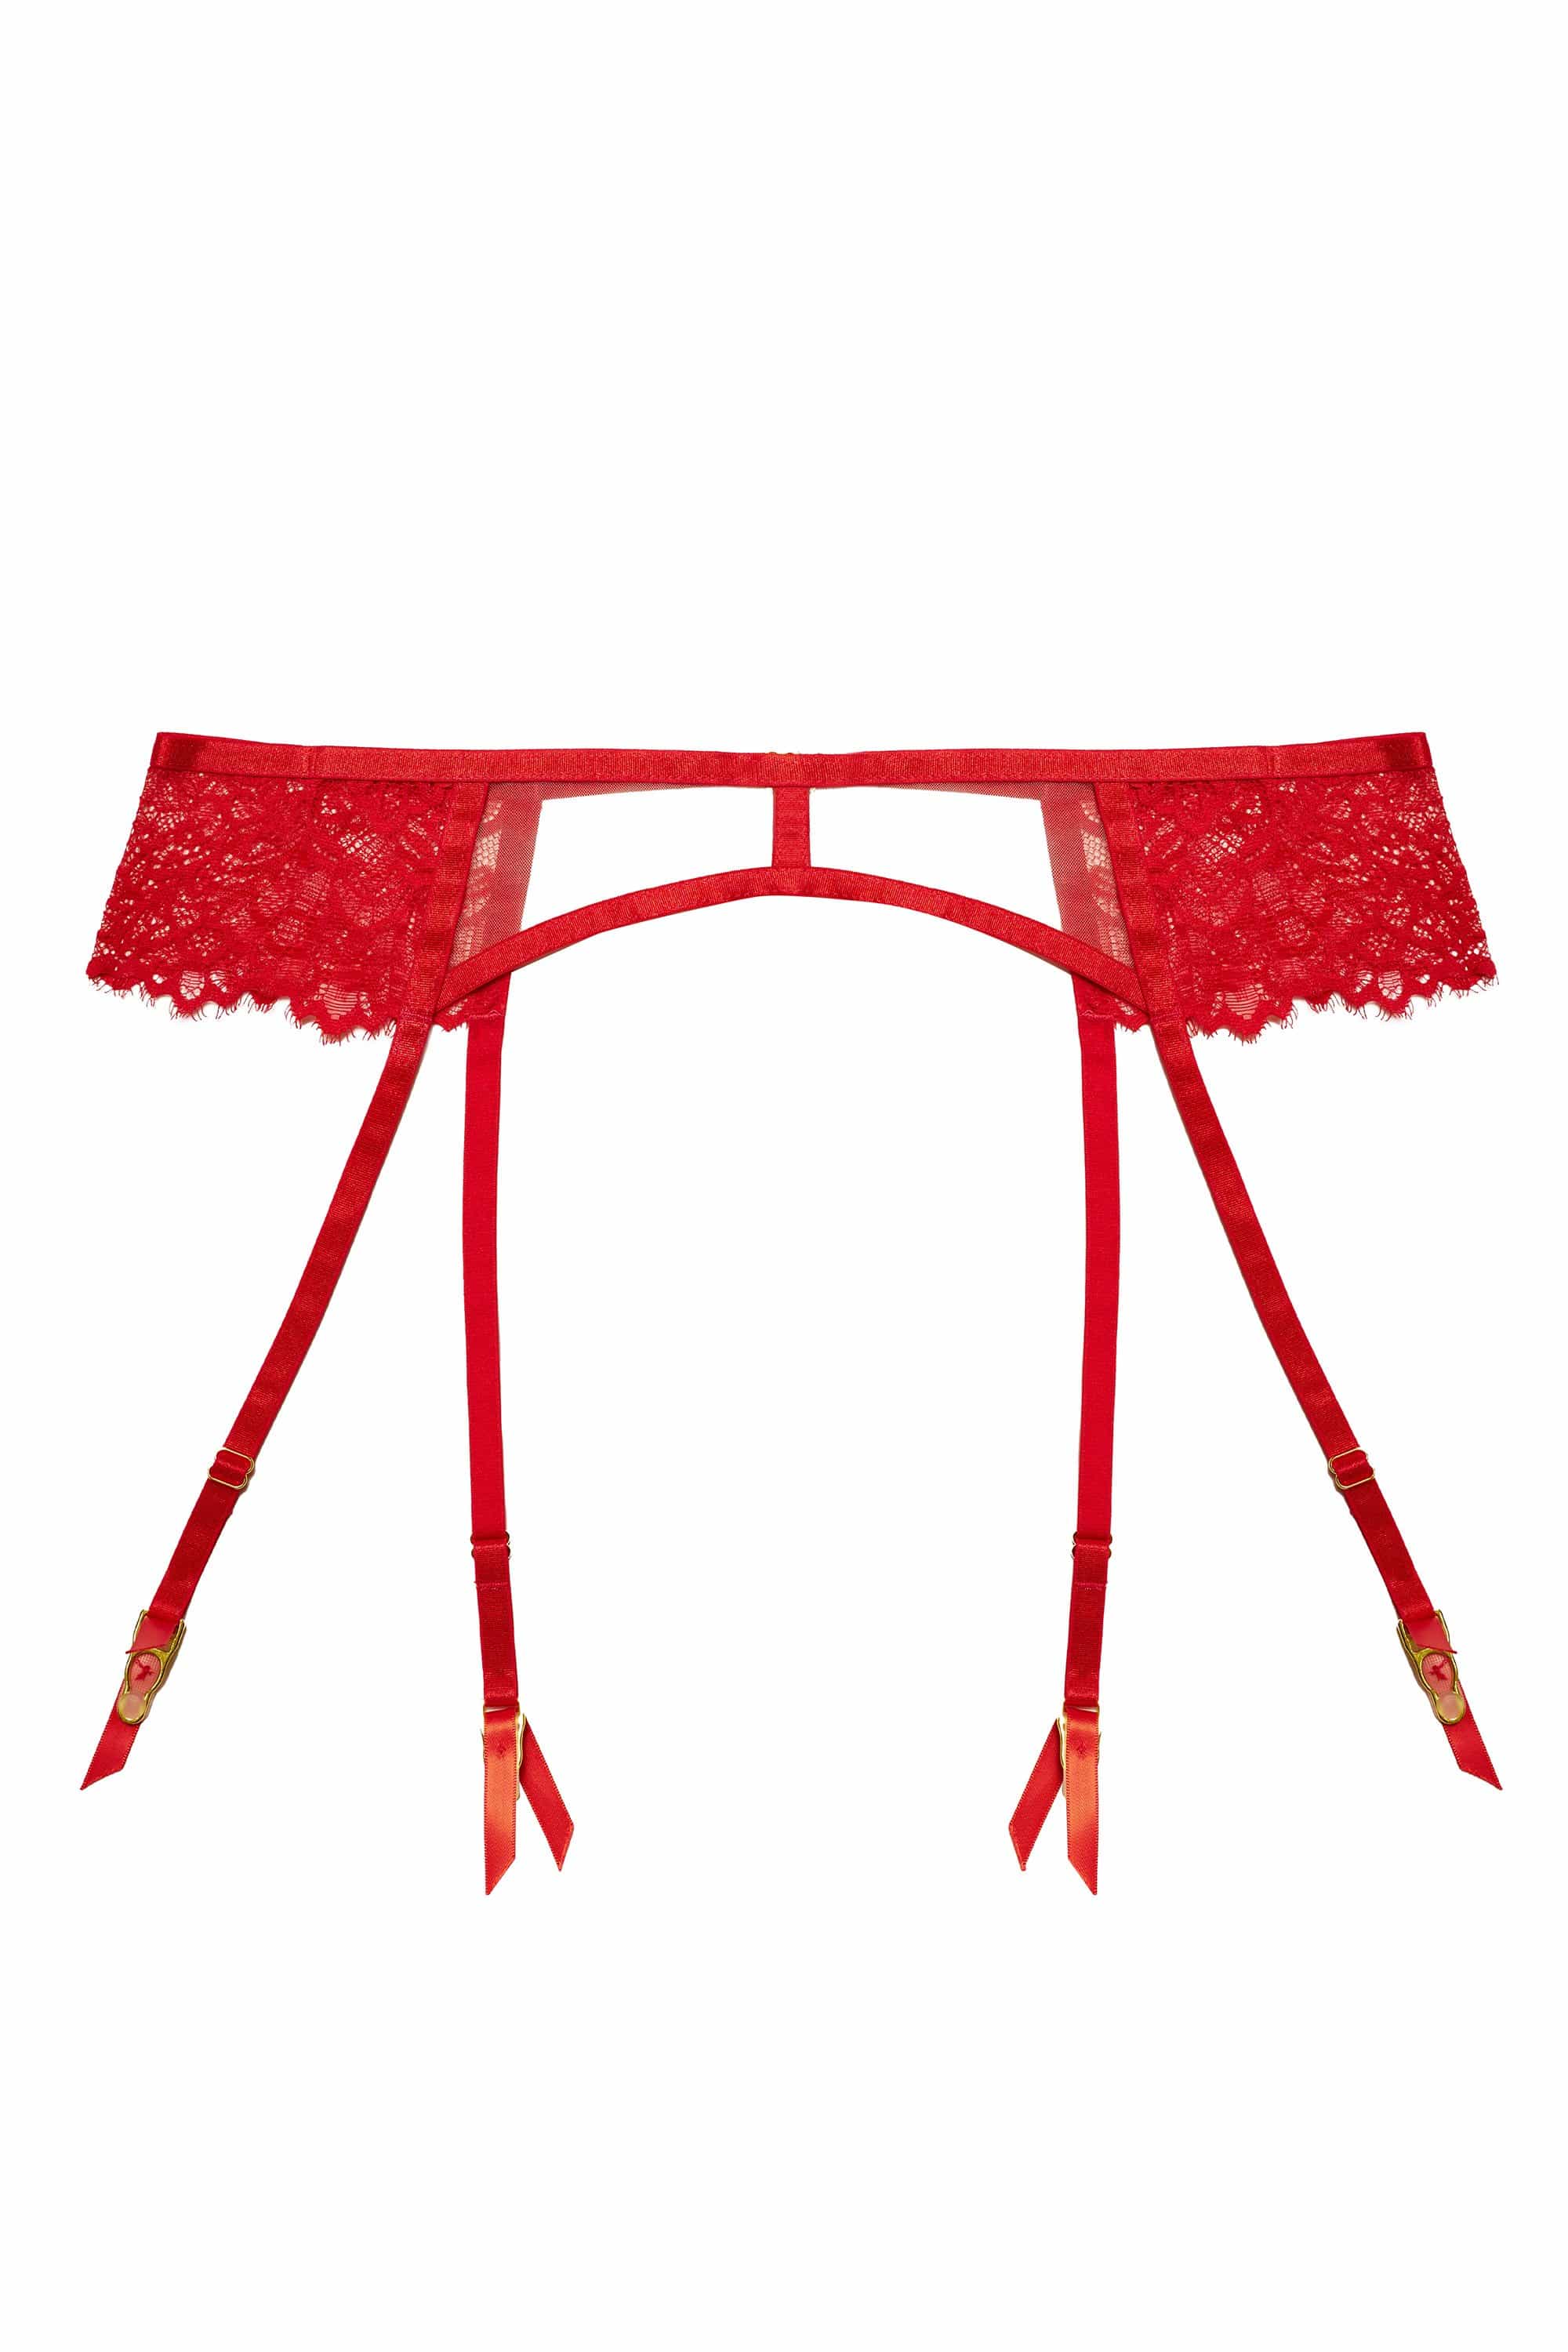 Mya Red Lace Suspender